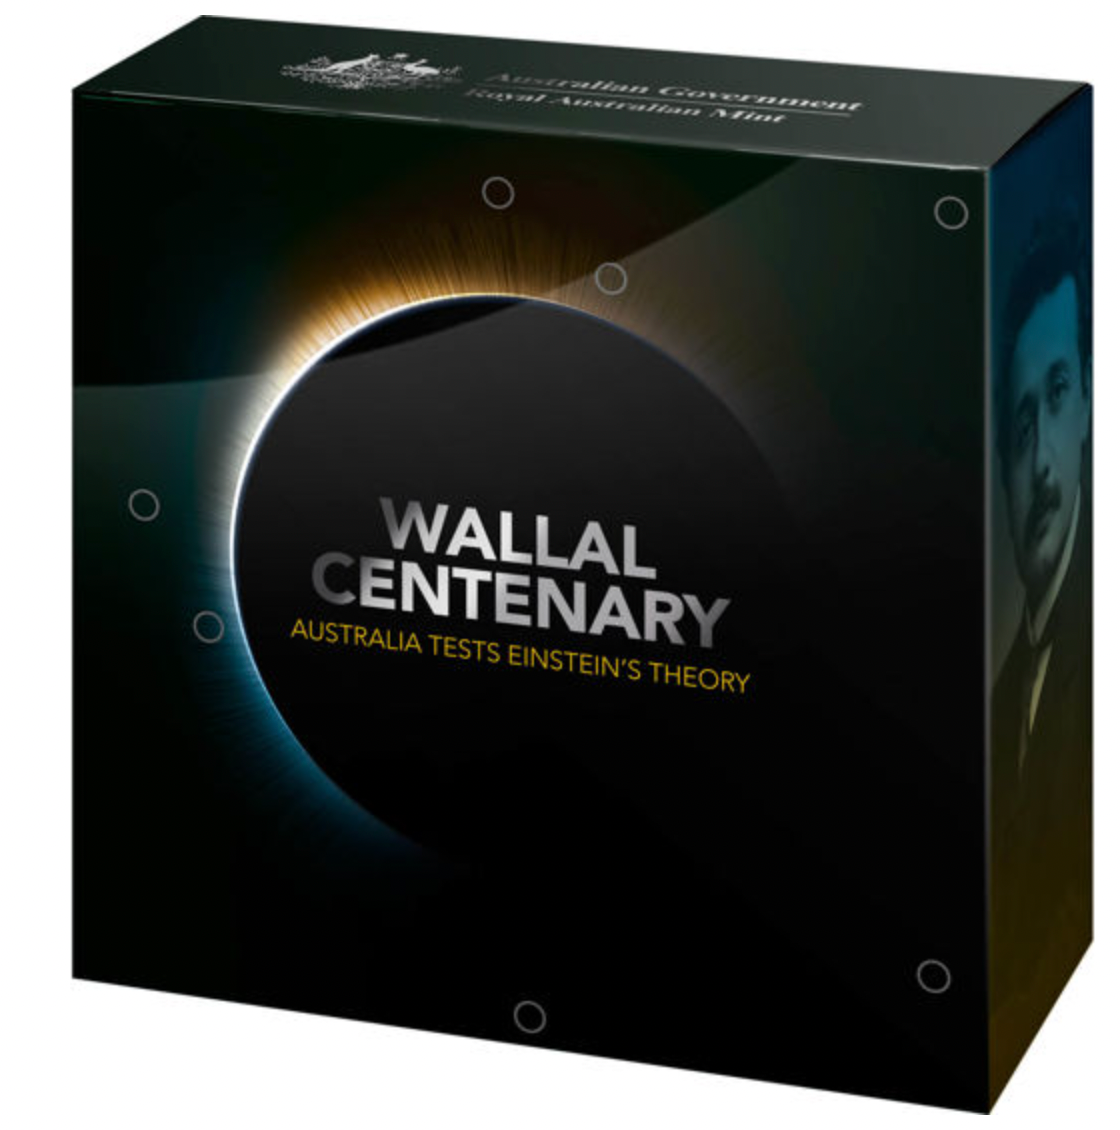 2022 Wallal Centenary Australia Tests Einstein's Theory - $5 1oz Silver Domed Proof Coin